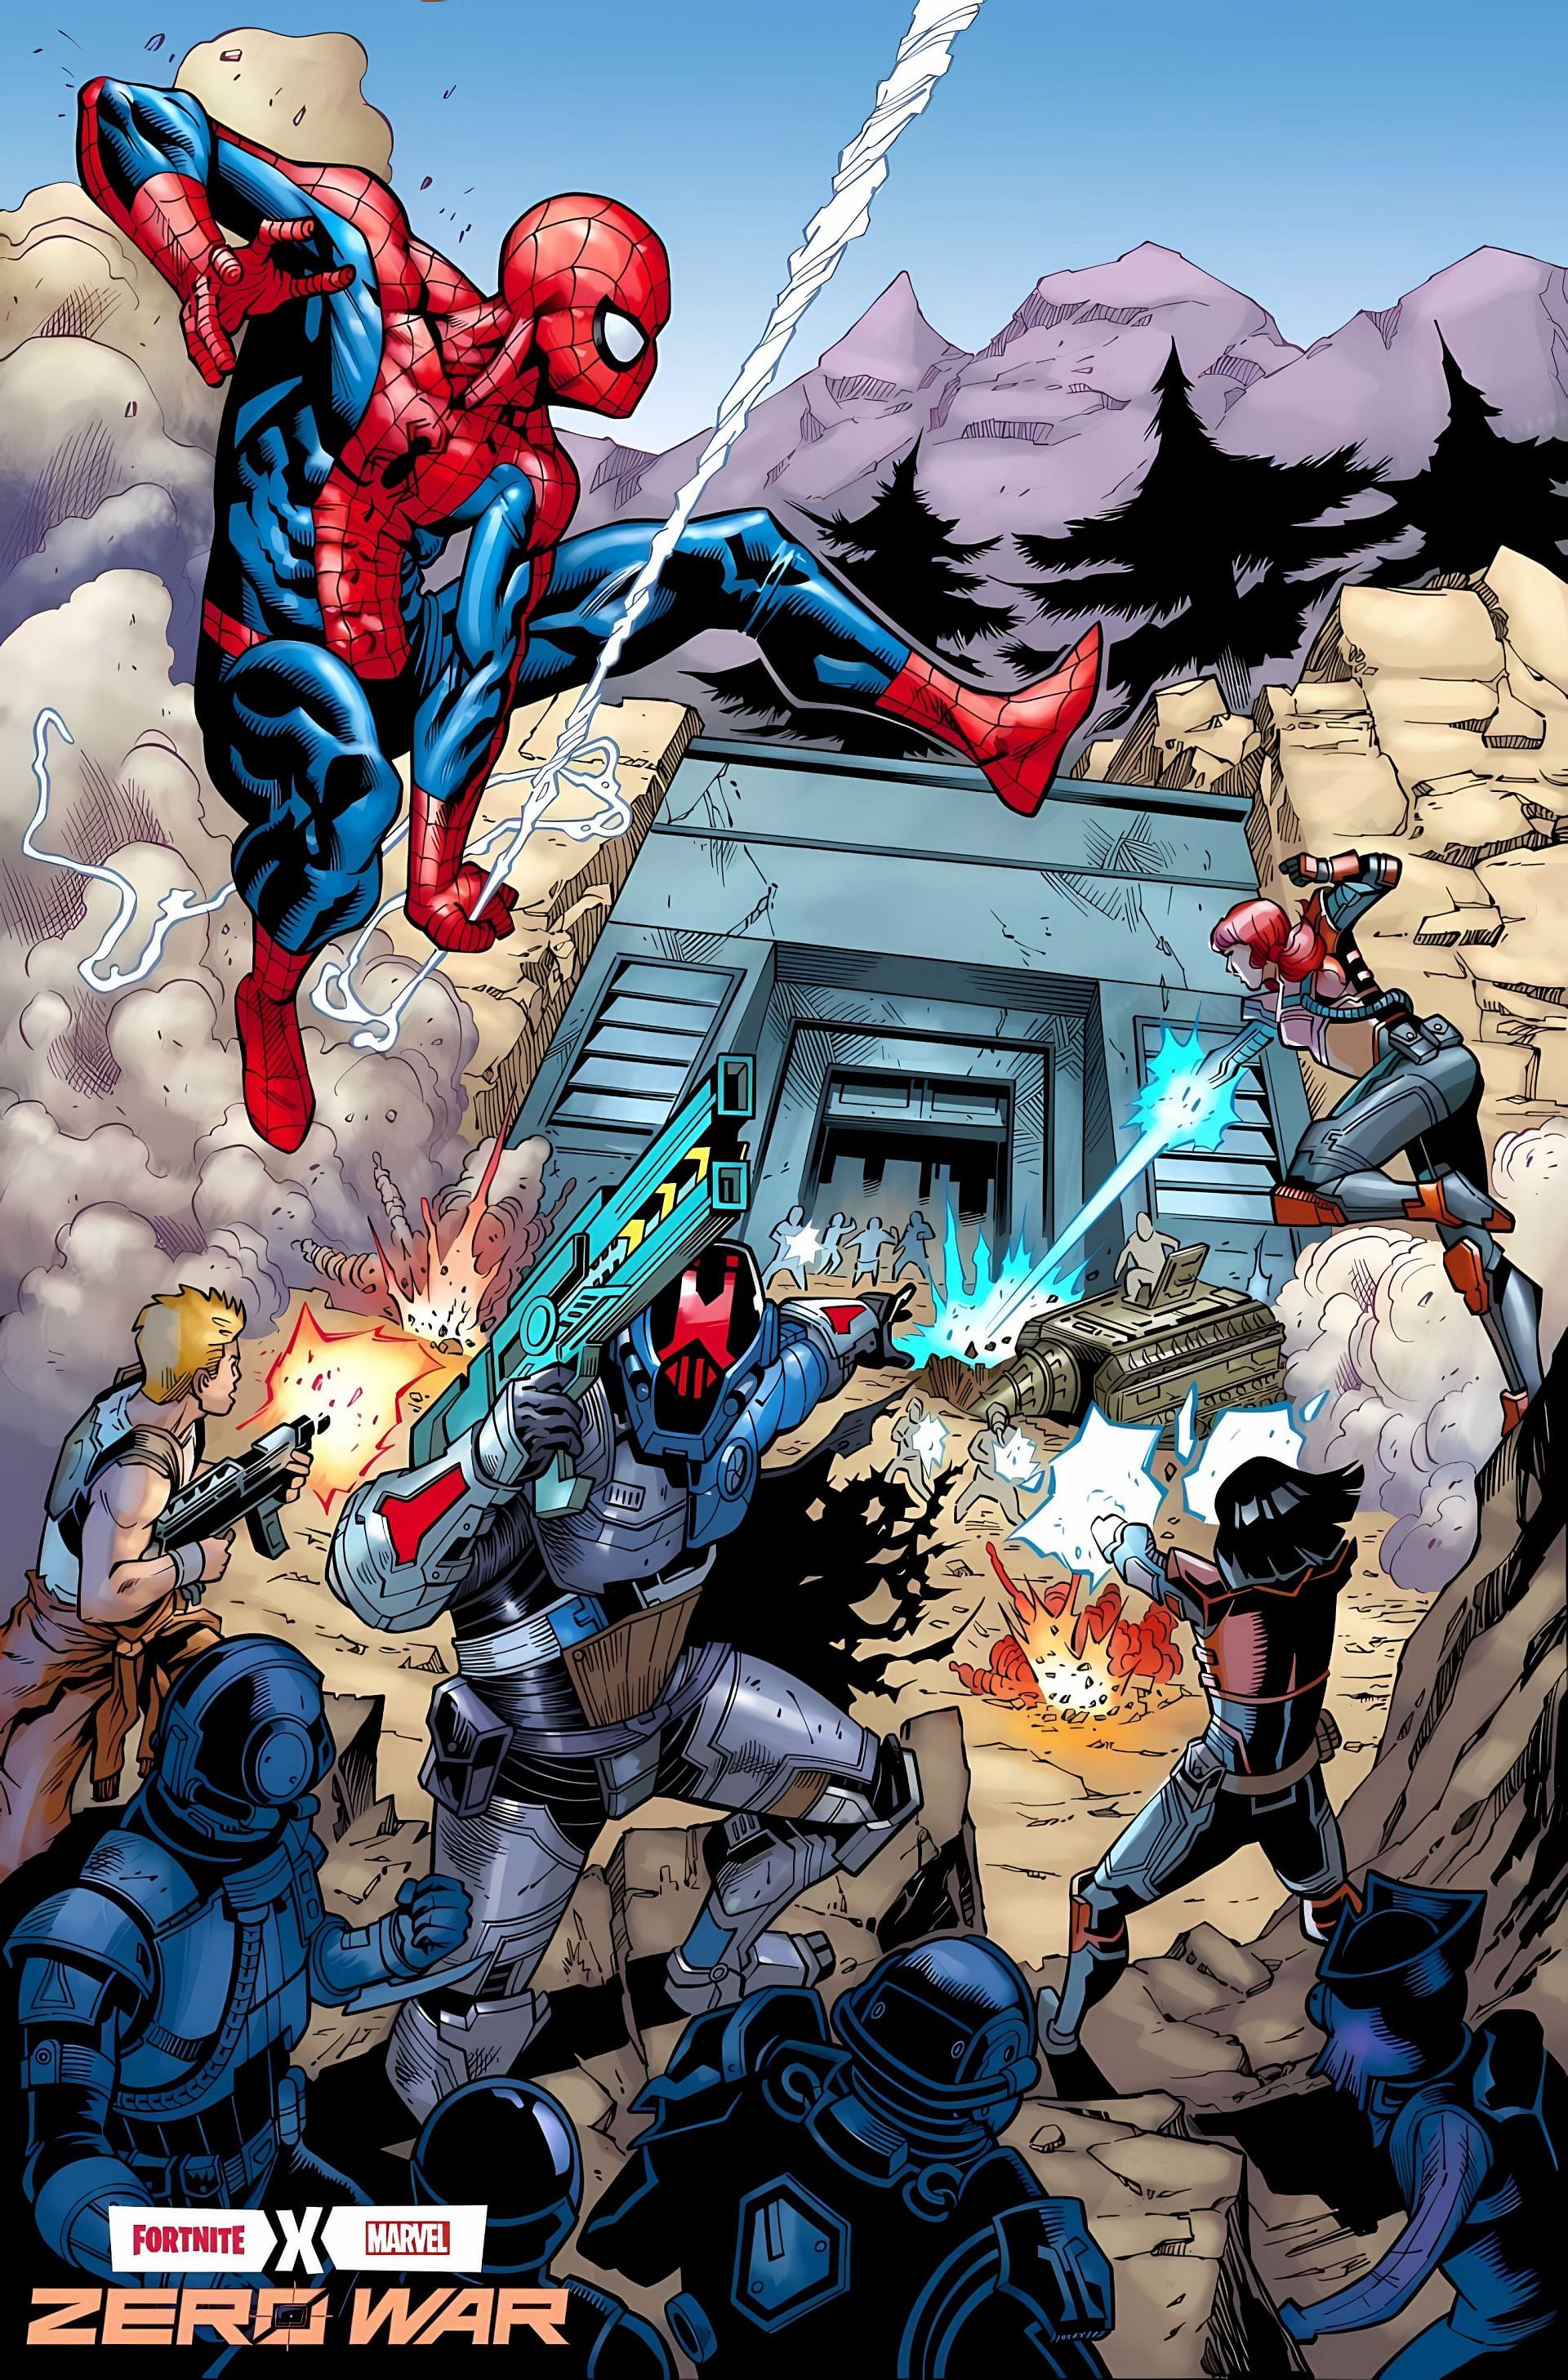 The Seven storming the Imagined Order (Image via Marvel Zero War comic)